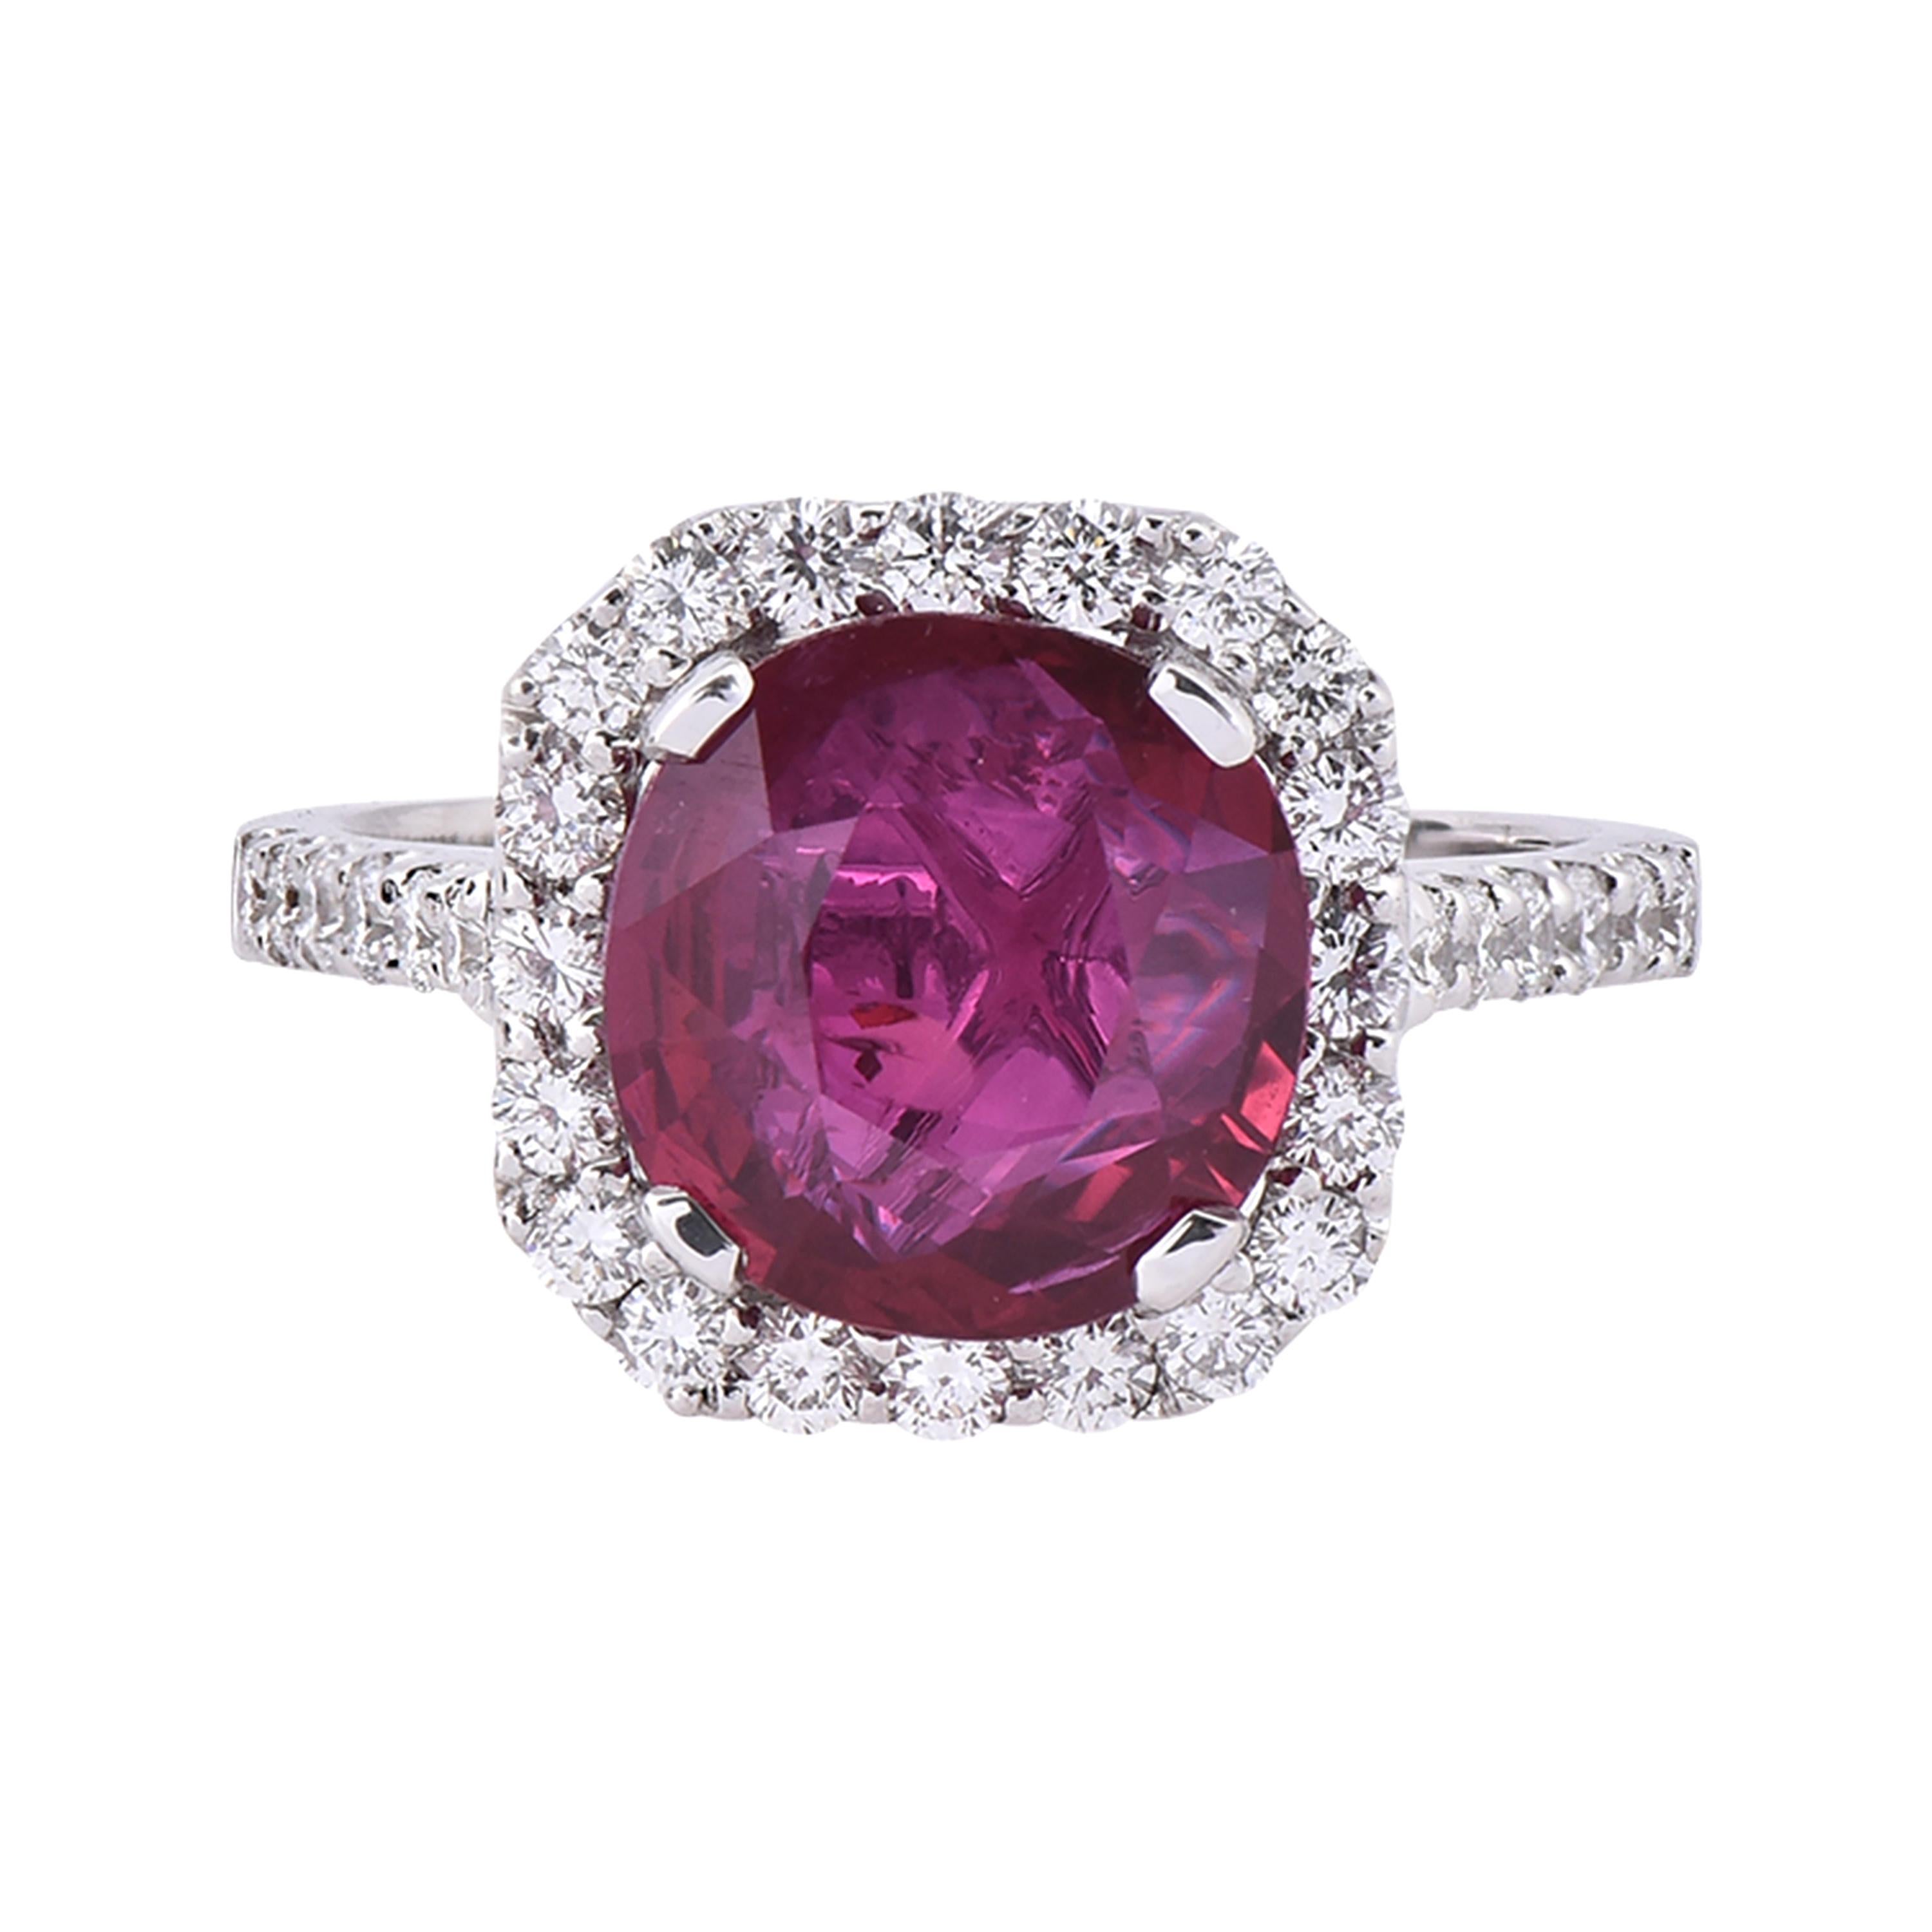 Laviere 4.02 Carat Burmese Ruby and Diamond Ring For Sale